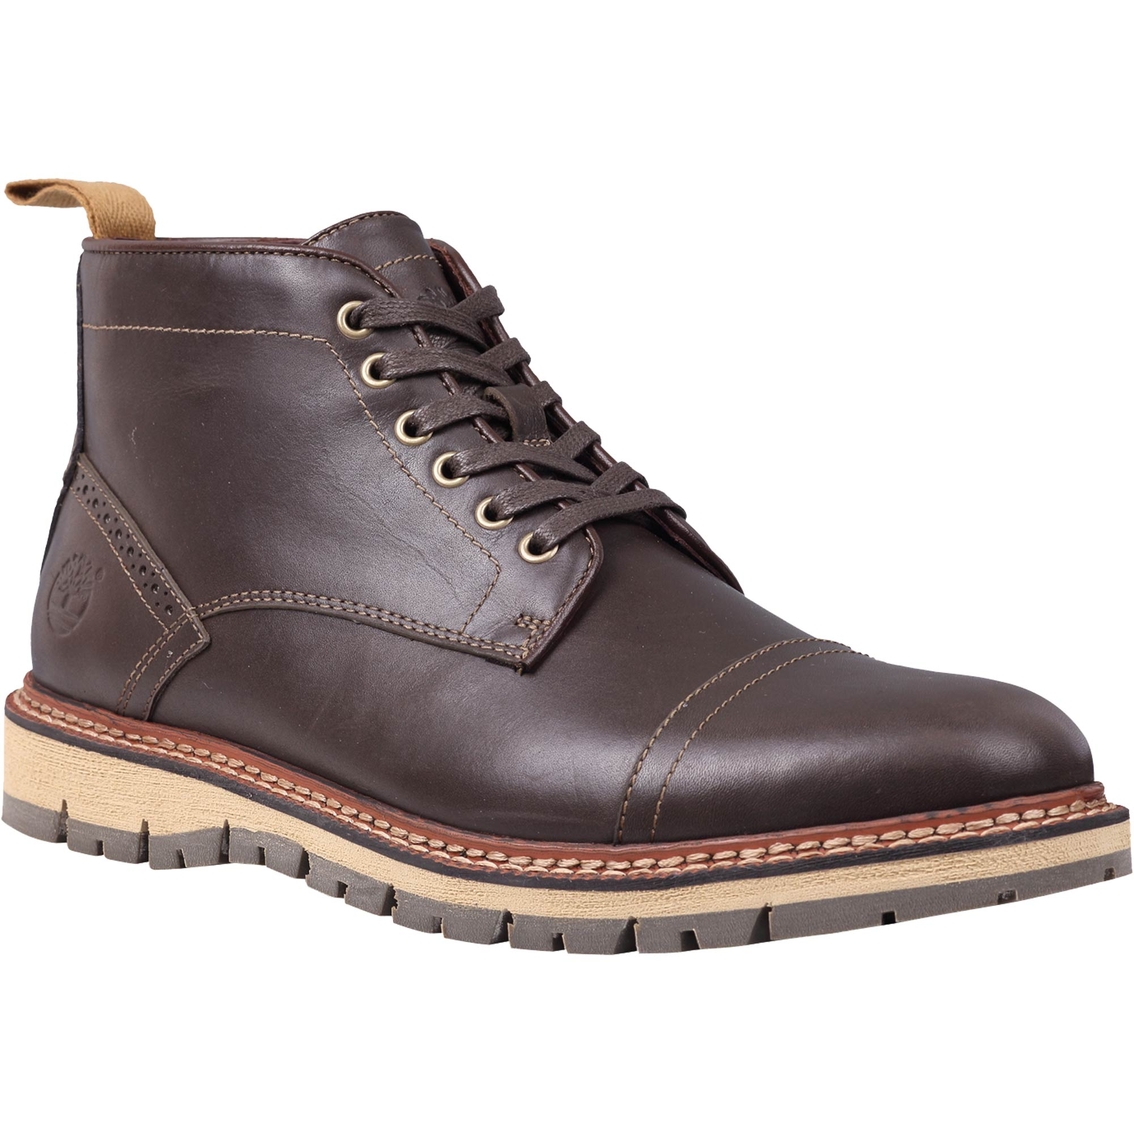 Timberland Men's Earthkeepers Britton Hill Chukka Boots | Casual ...